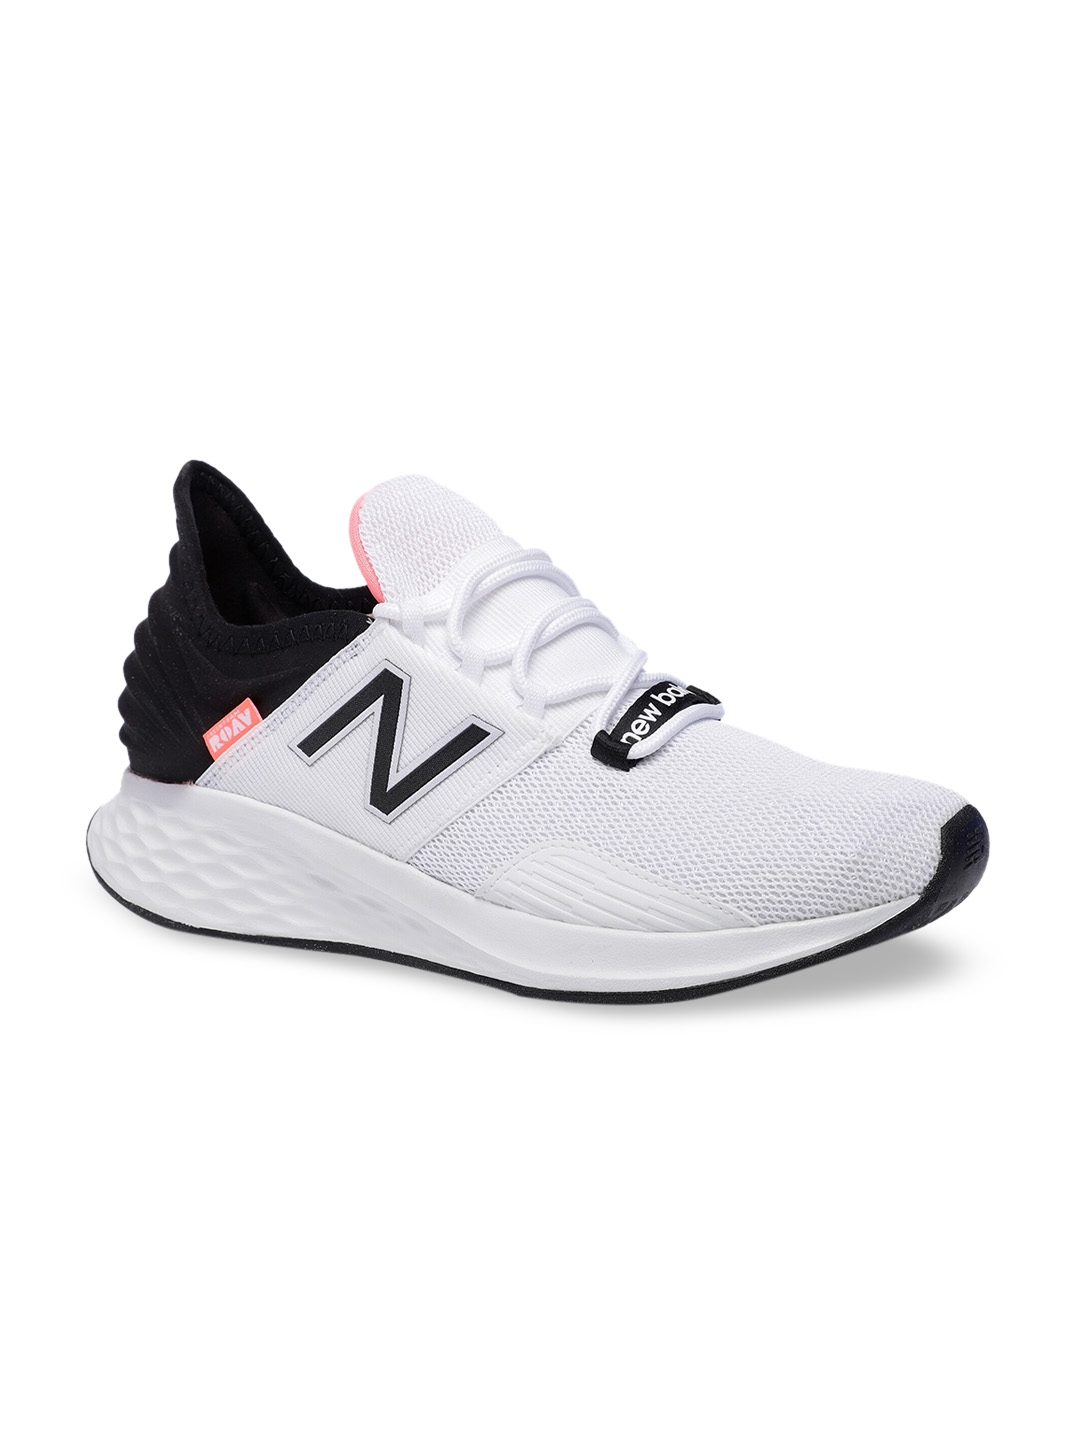 Buy New Balance Women White & Black Synthetic ROAVV1 Running Shoes ...